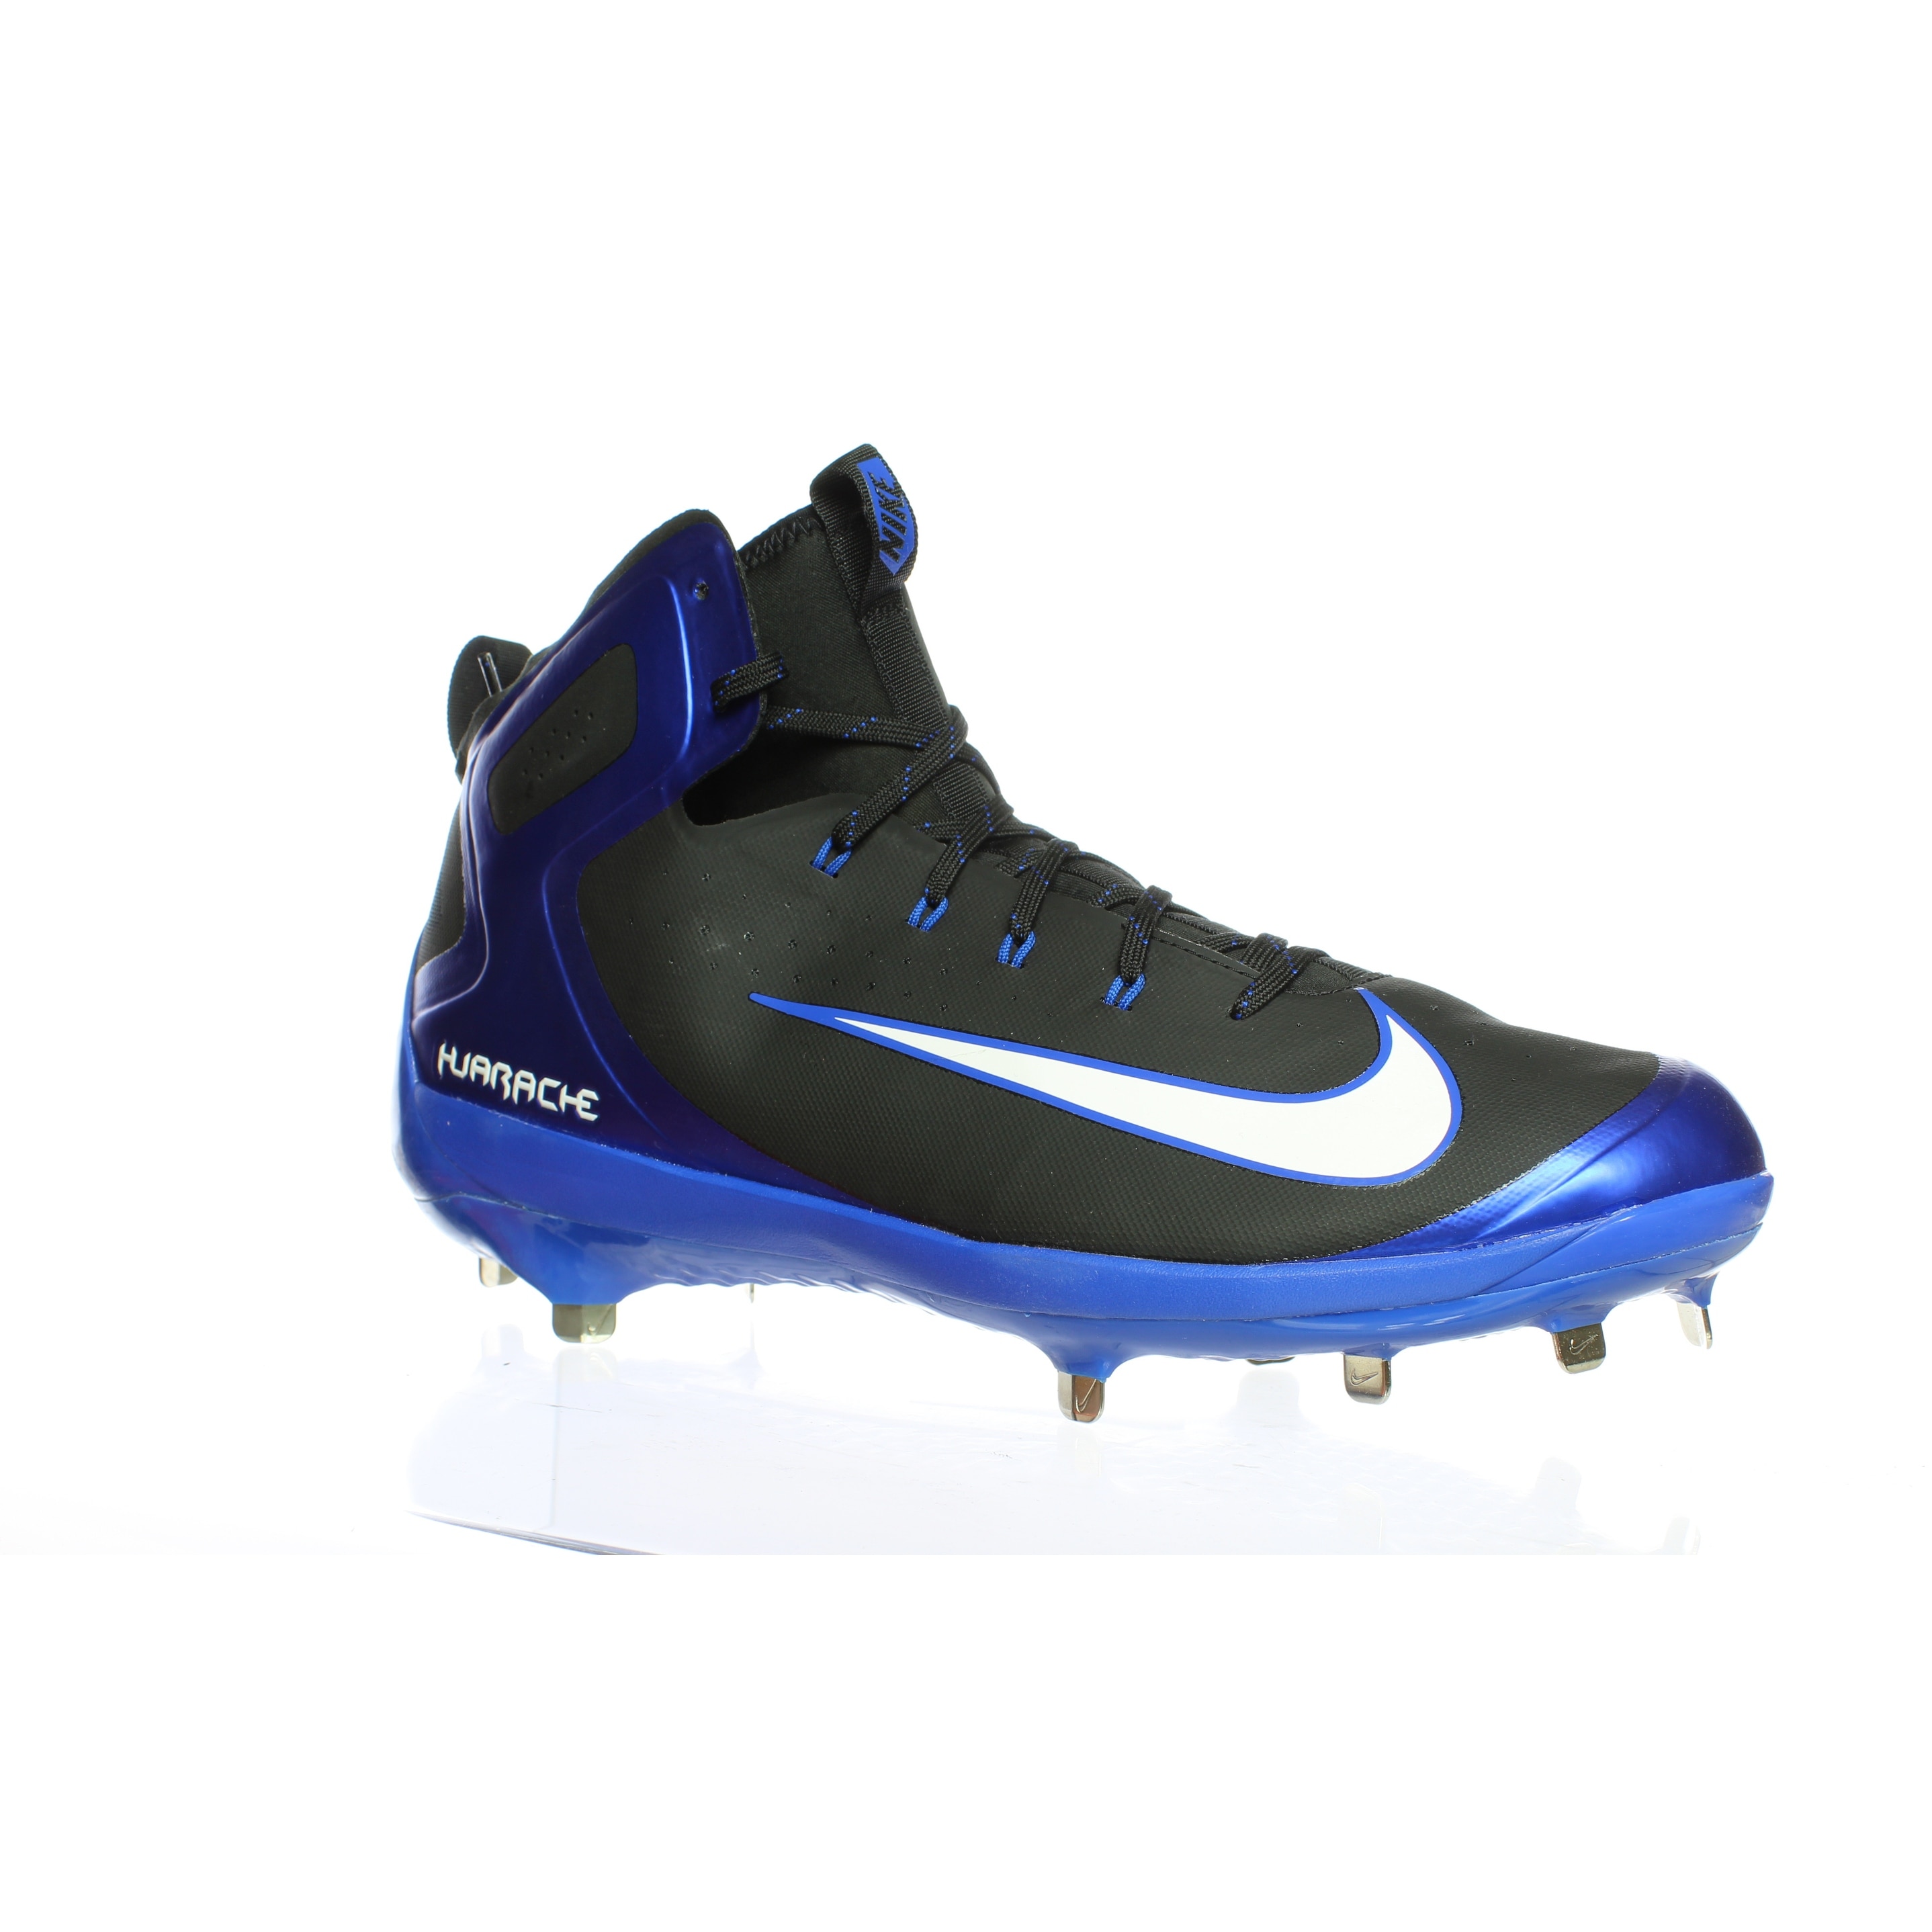 size 16 football cleats